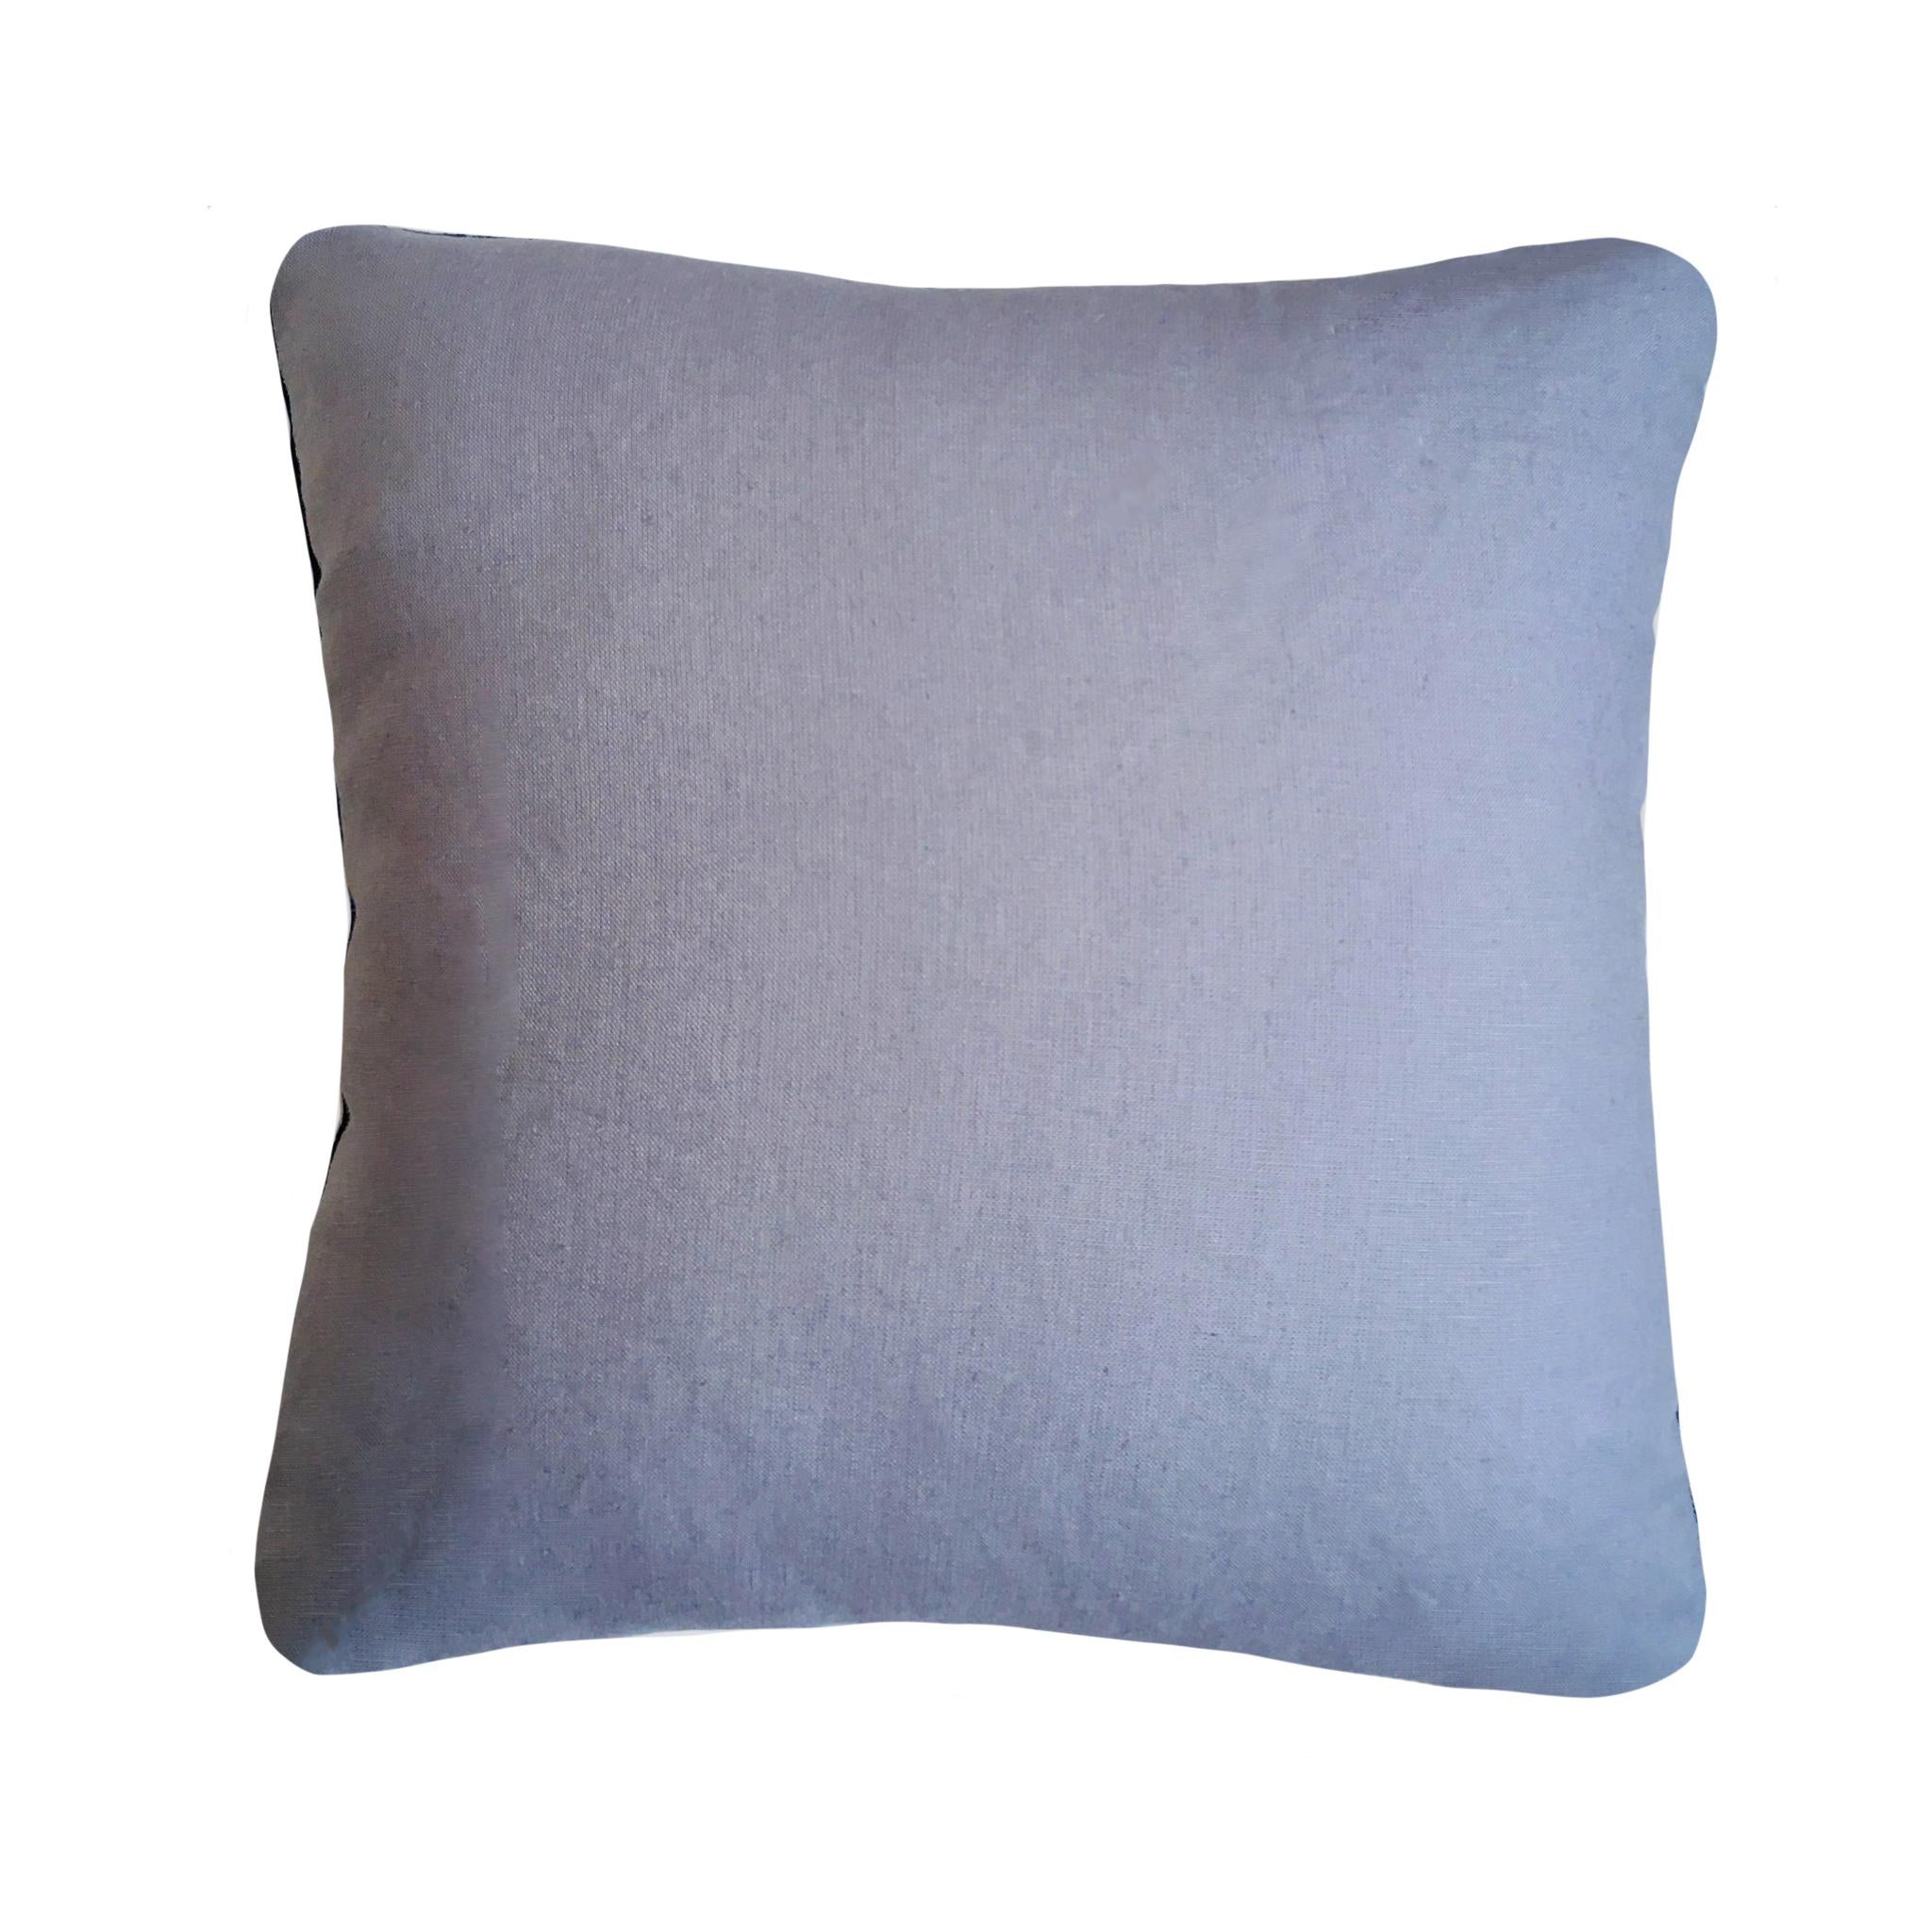 Gold velvet cushion dyed with indigo in Ikat pattern with grey linen backing. Hand-dyed and sewn in New York City, down pillow insert made locally in NYC. Pillow measures 18 x 18 inches. Each velvet cushion is hand made and one of a kind.

Custom